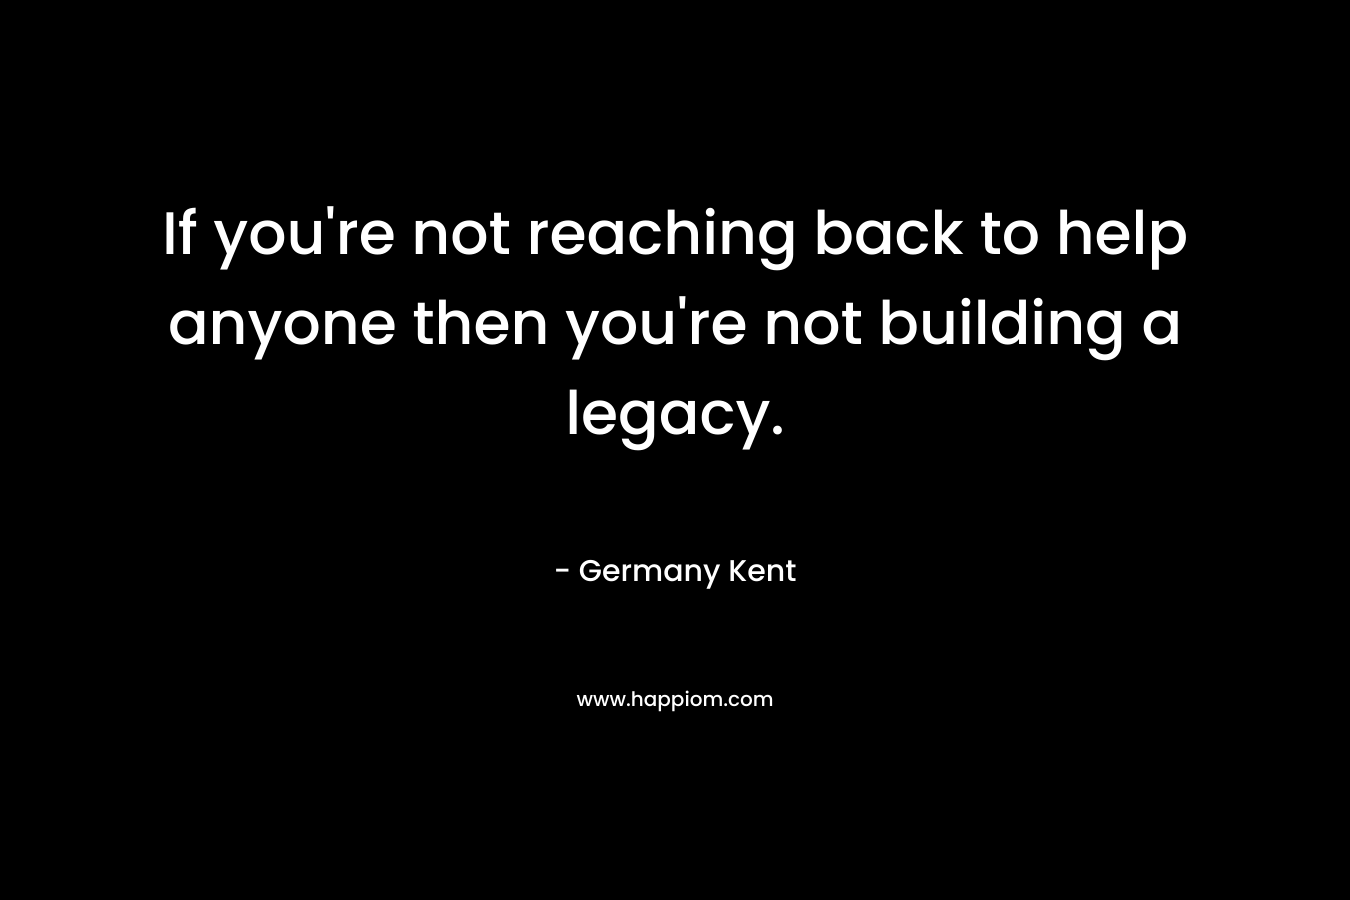 If you're not reaching back to help anyone then you're not building a legacy.